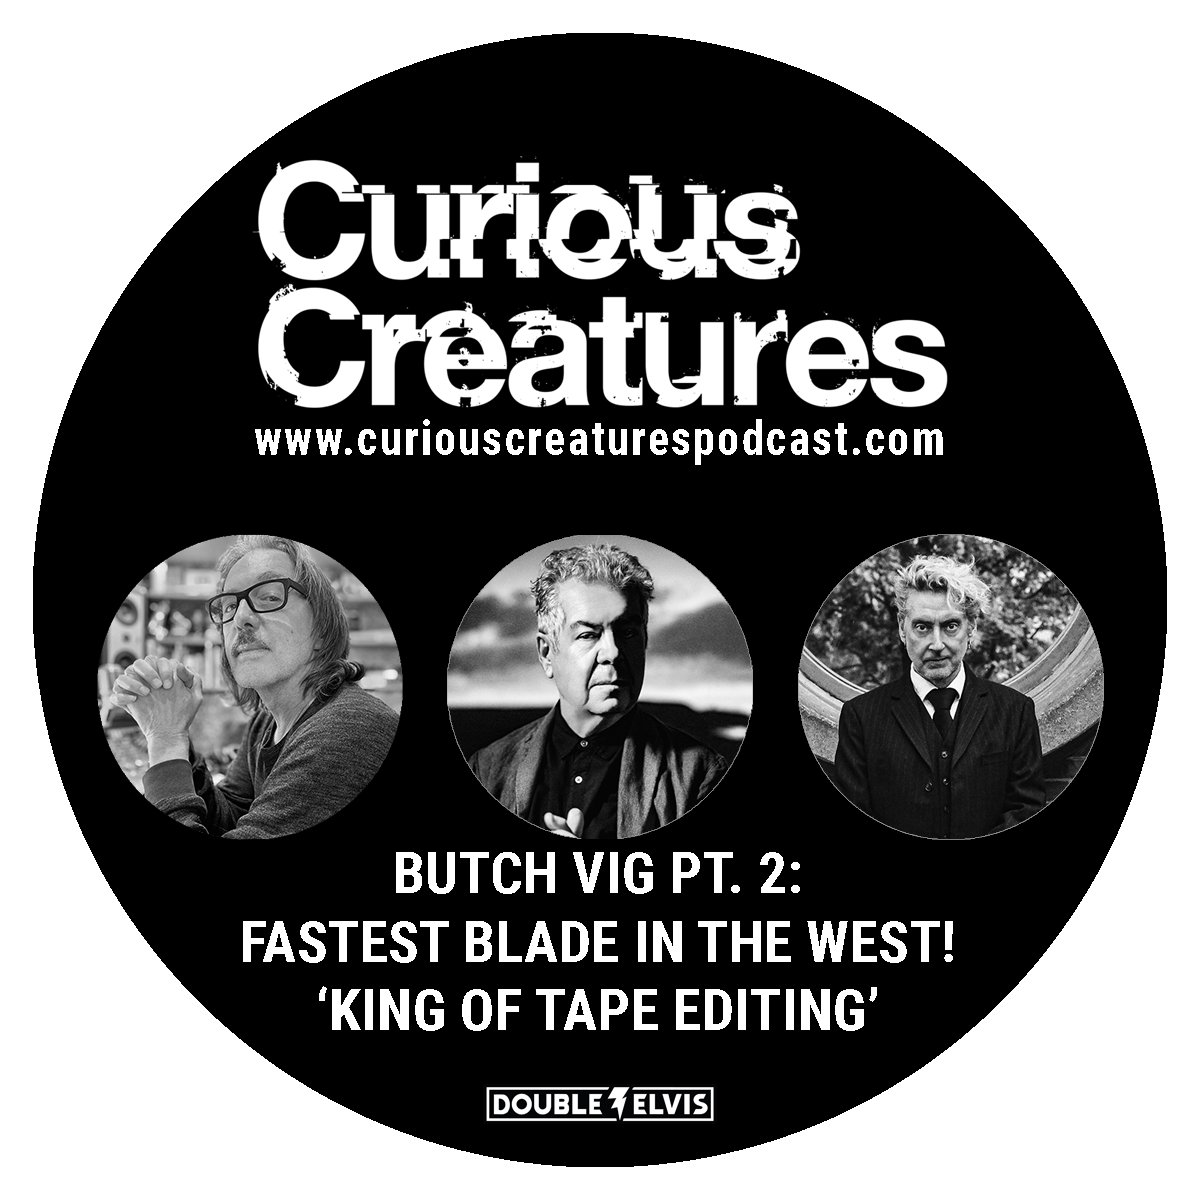 Join us on @curecreatures for pt. 2 of our conversation with Garbage drummer and super producer Butch Vig! You can find this week's episode - Butch Vig Pt. 2: Fastest Blade in the West! ‘King of Tape Editing - wherever you get your podcasts!